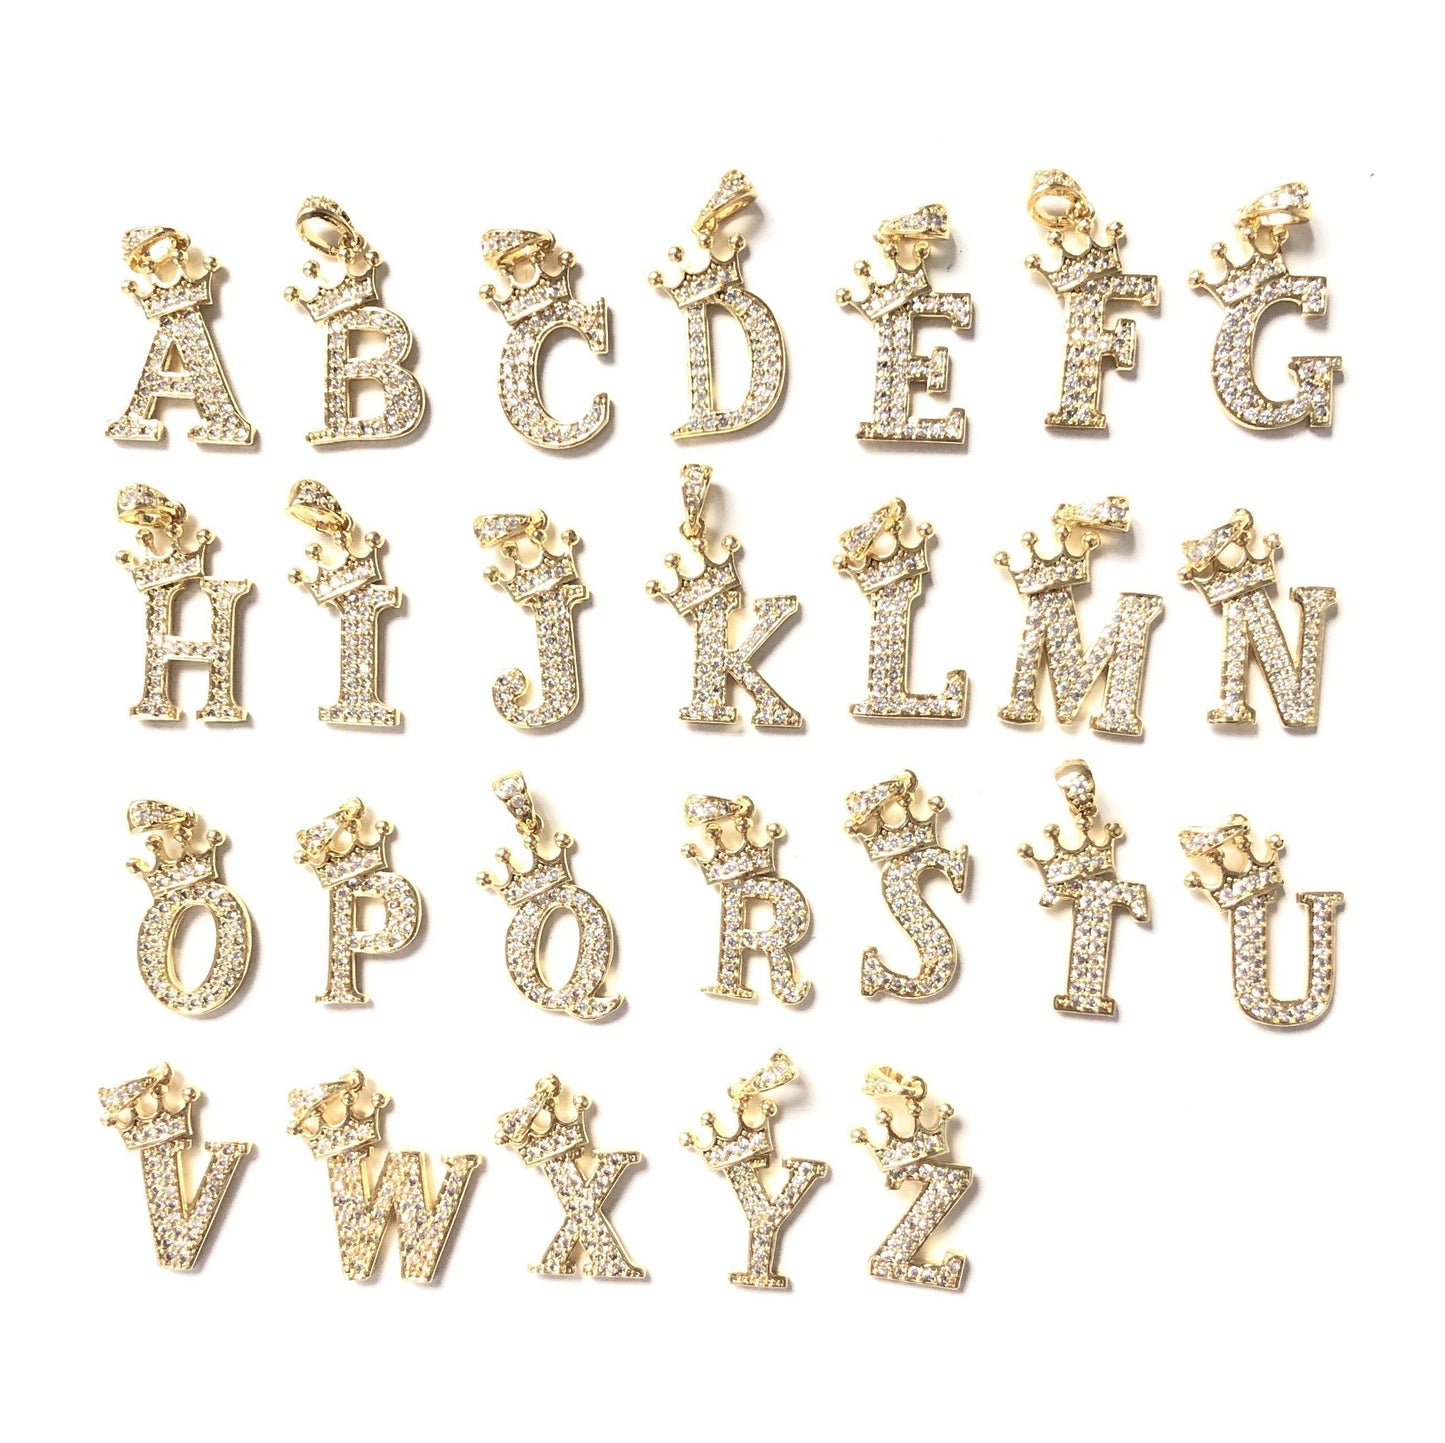 26pcs/lot 20mm CZ Paved Crown Initial Letter Alphabet Charms Gold, 26pcs from A to Z CZ Paved Charms Initials & Numbers Charms Beads Beyond